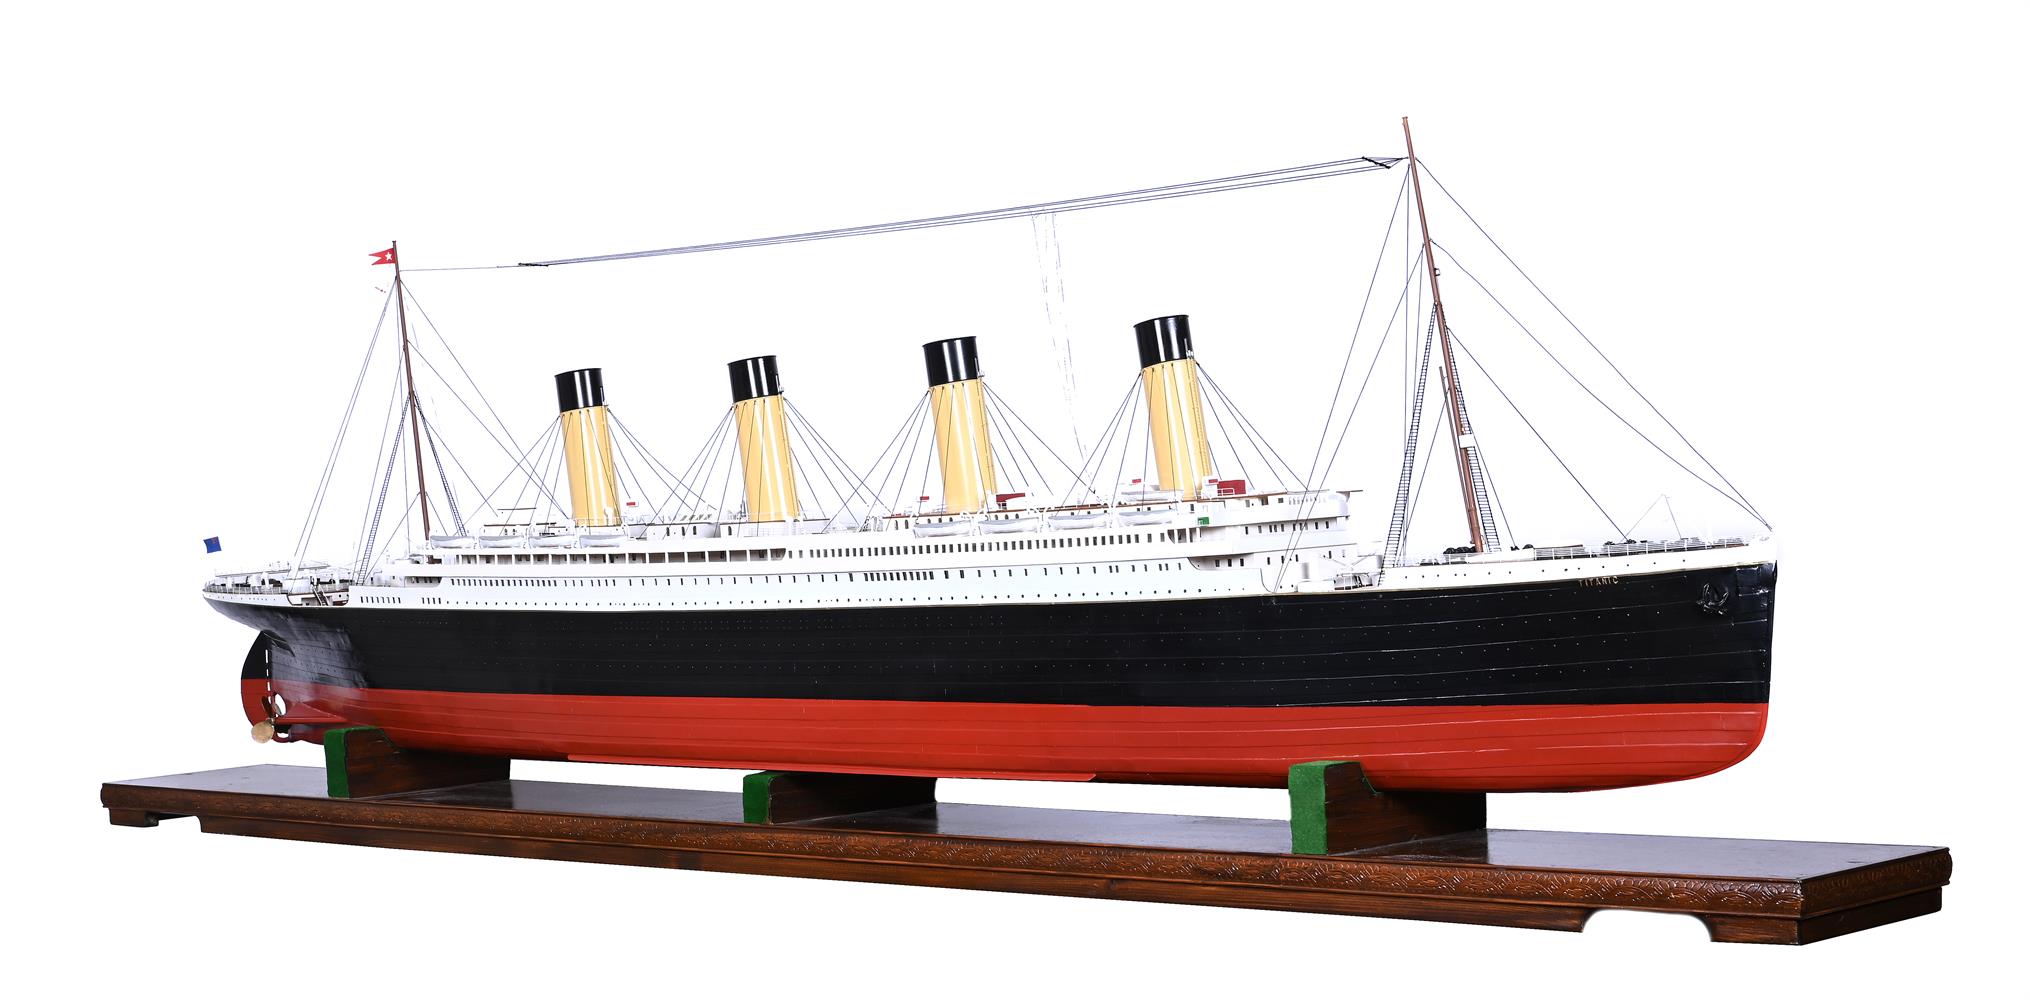 A LARGE SCALE MODEL OF THE WHITE STAR LINE RMS TITANIC, 20TH CENTURY - Image 2 of 3